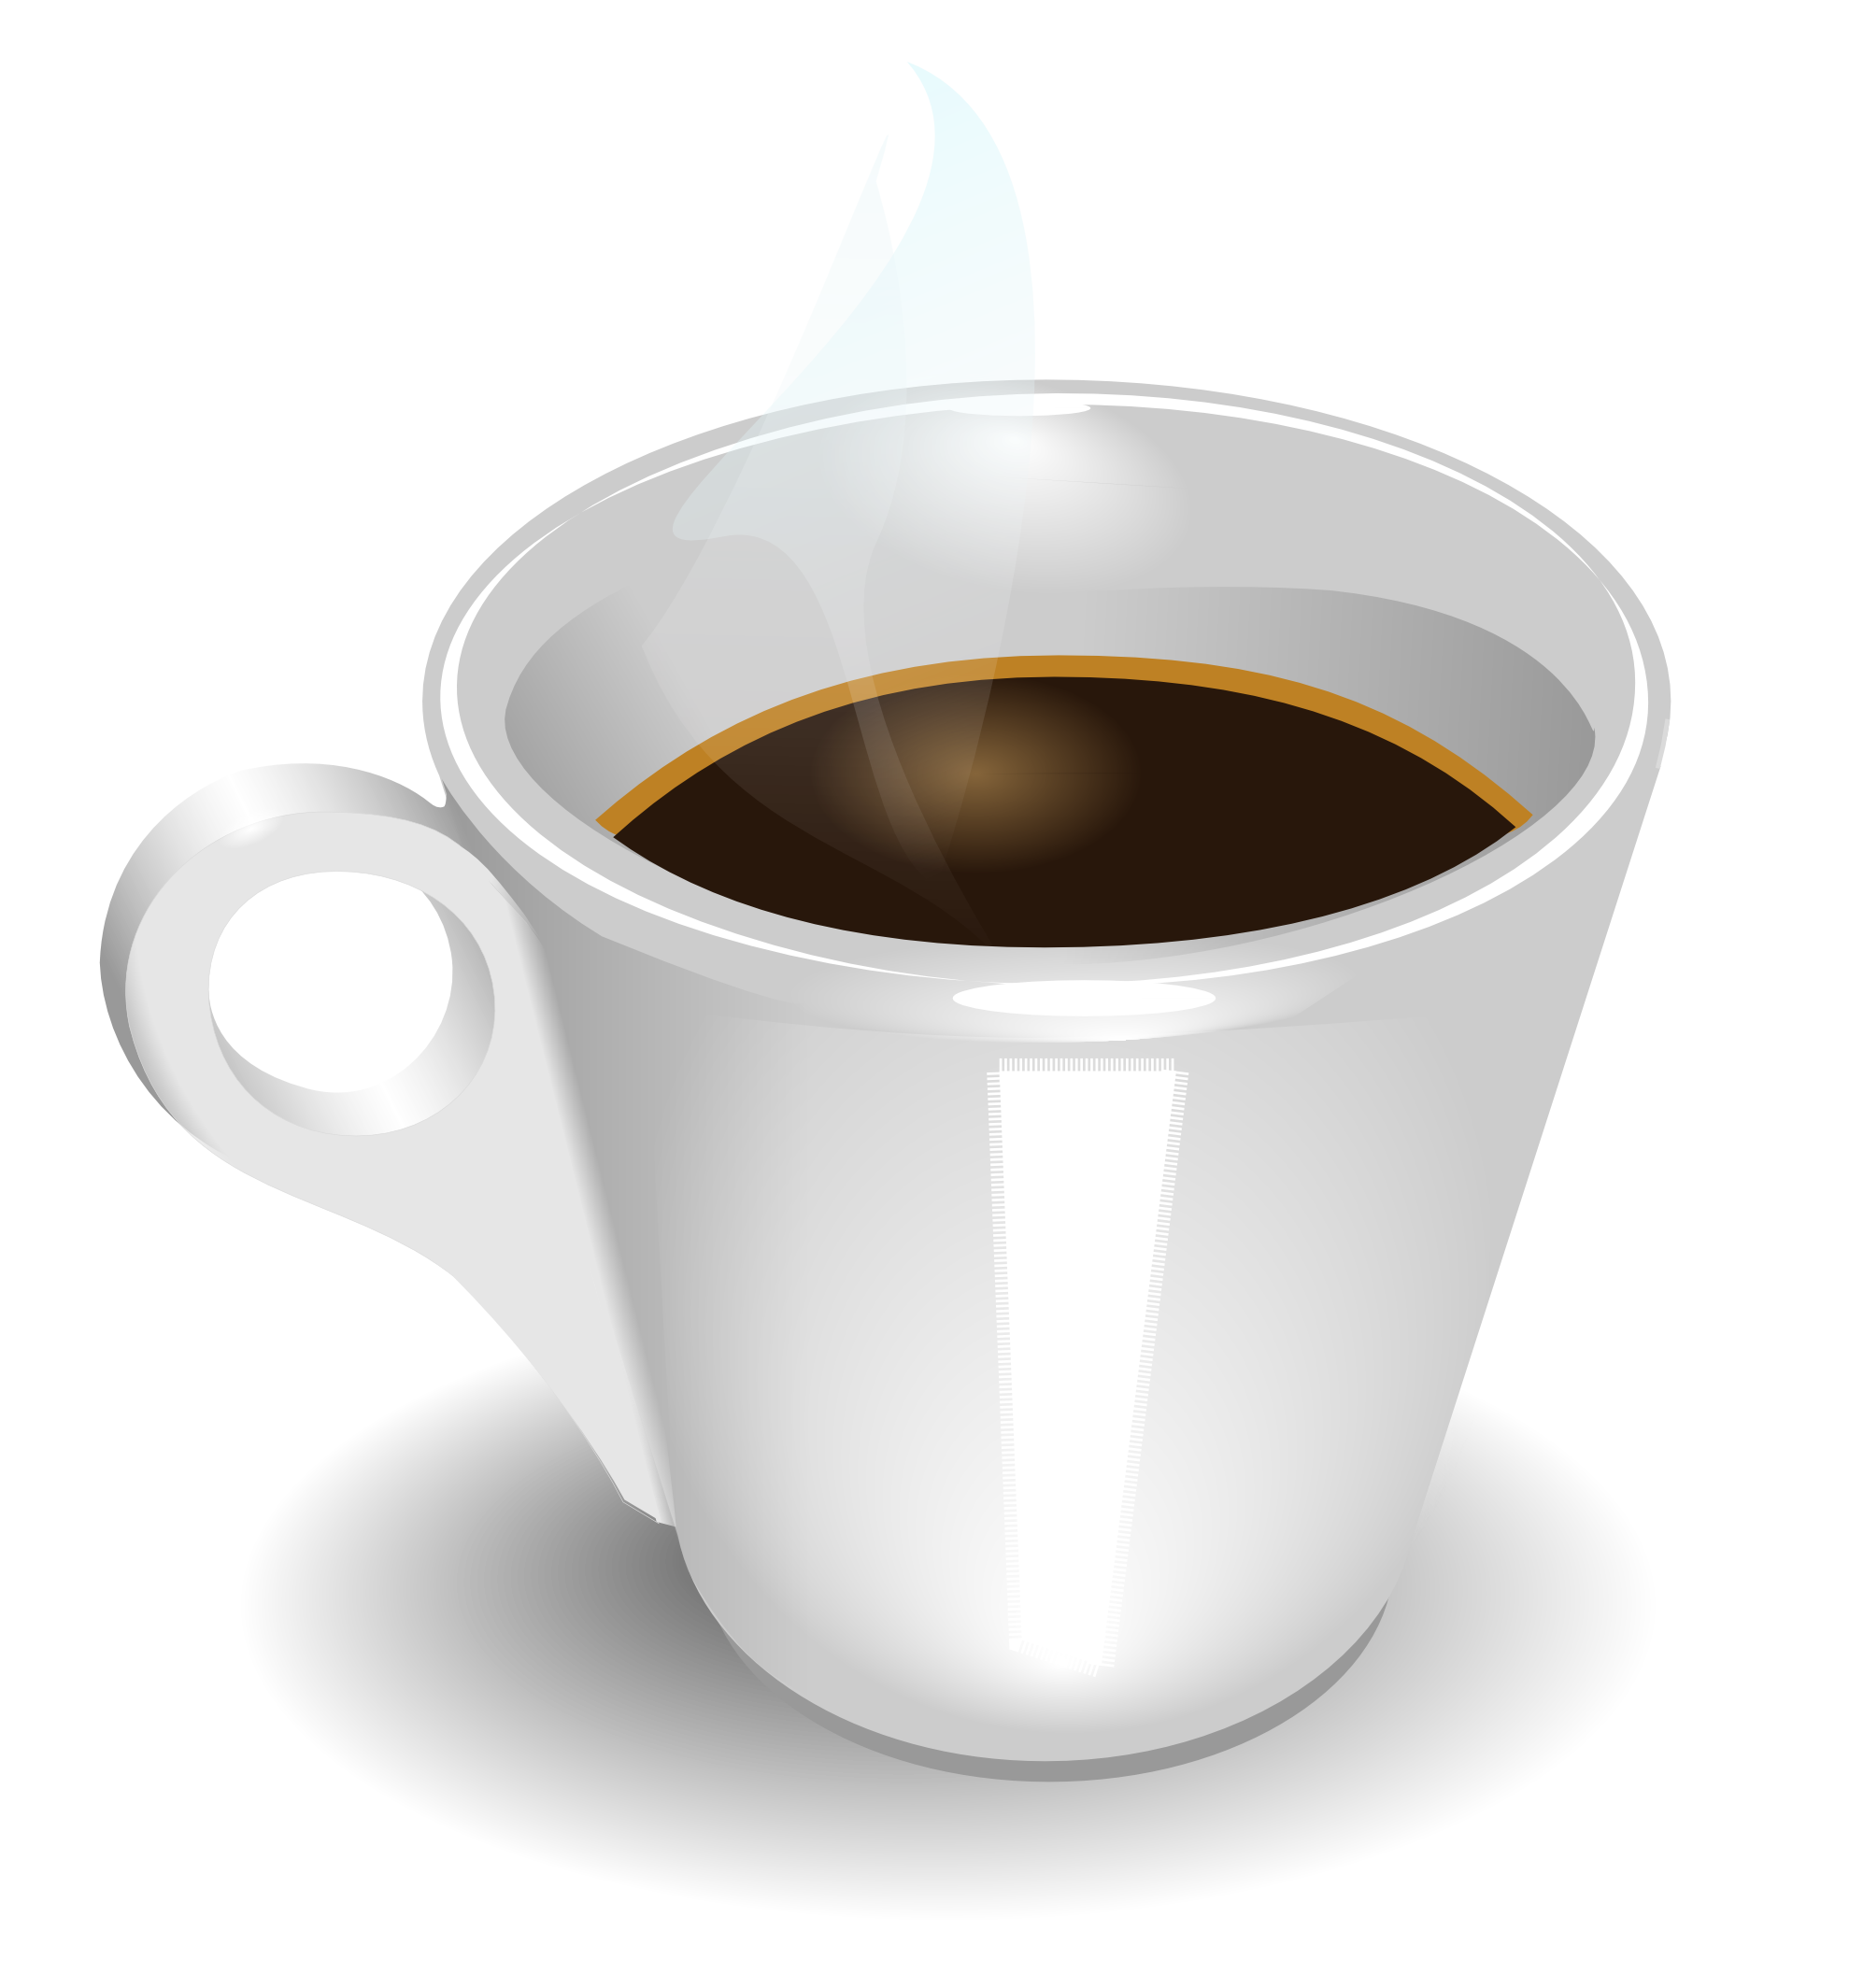 Cup Png Image - Cup Of Coffee, Transparent background PNG HD thumbnail